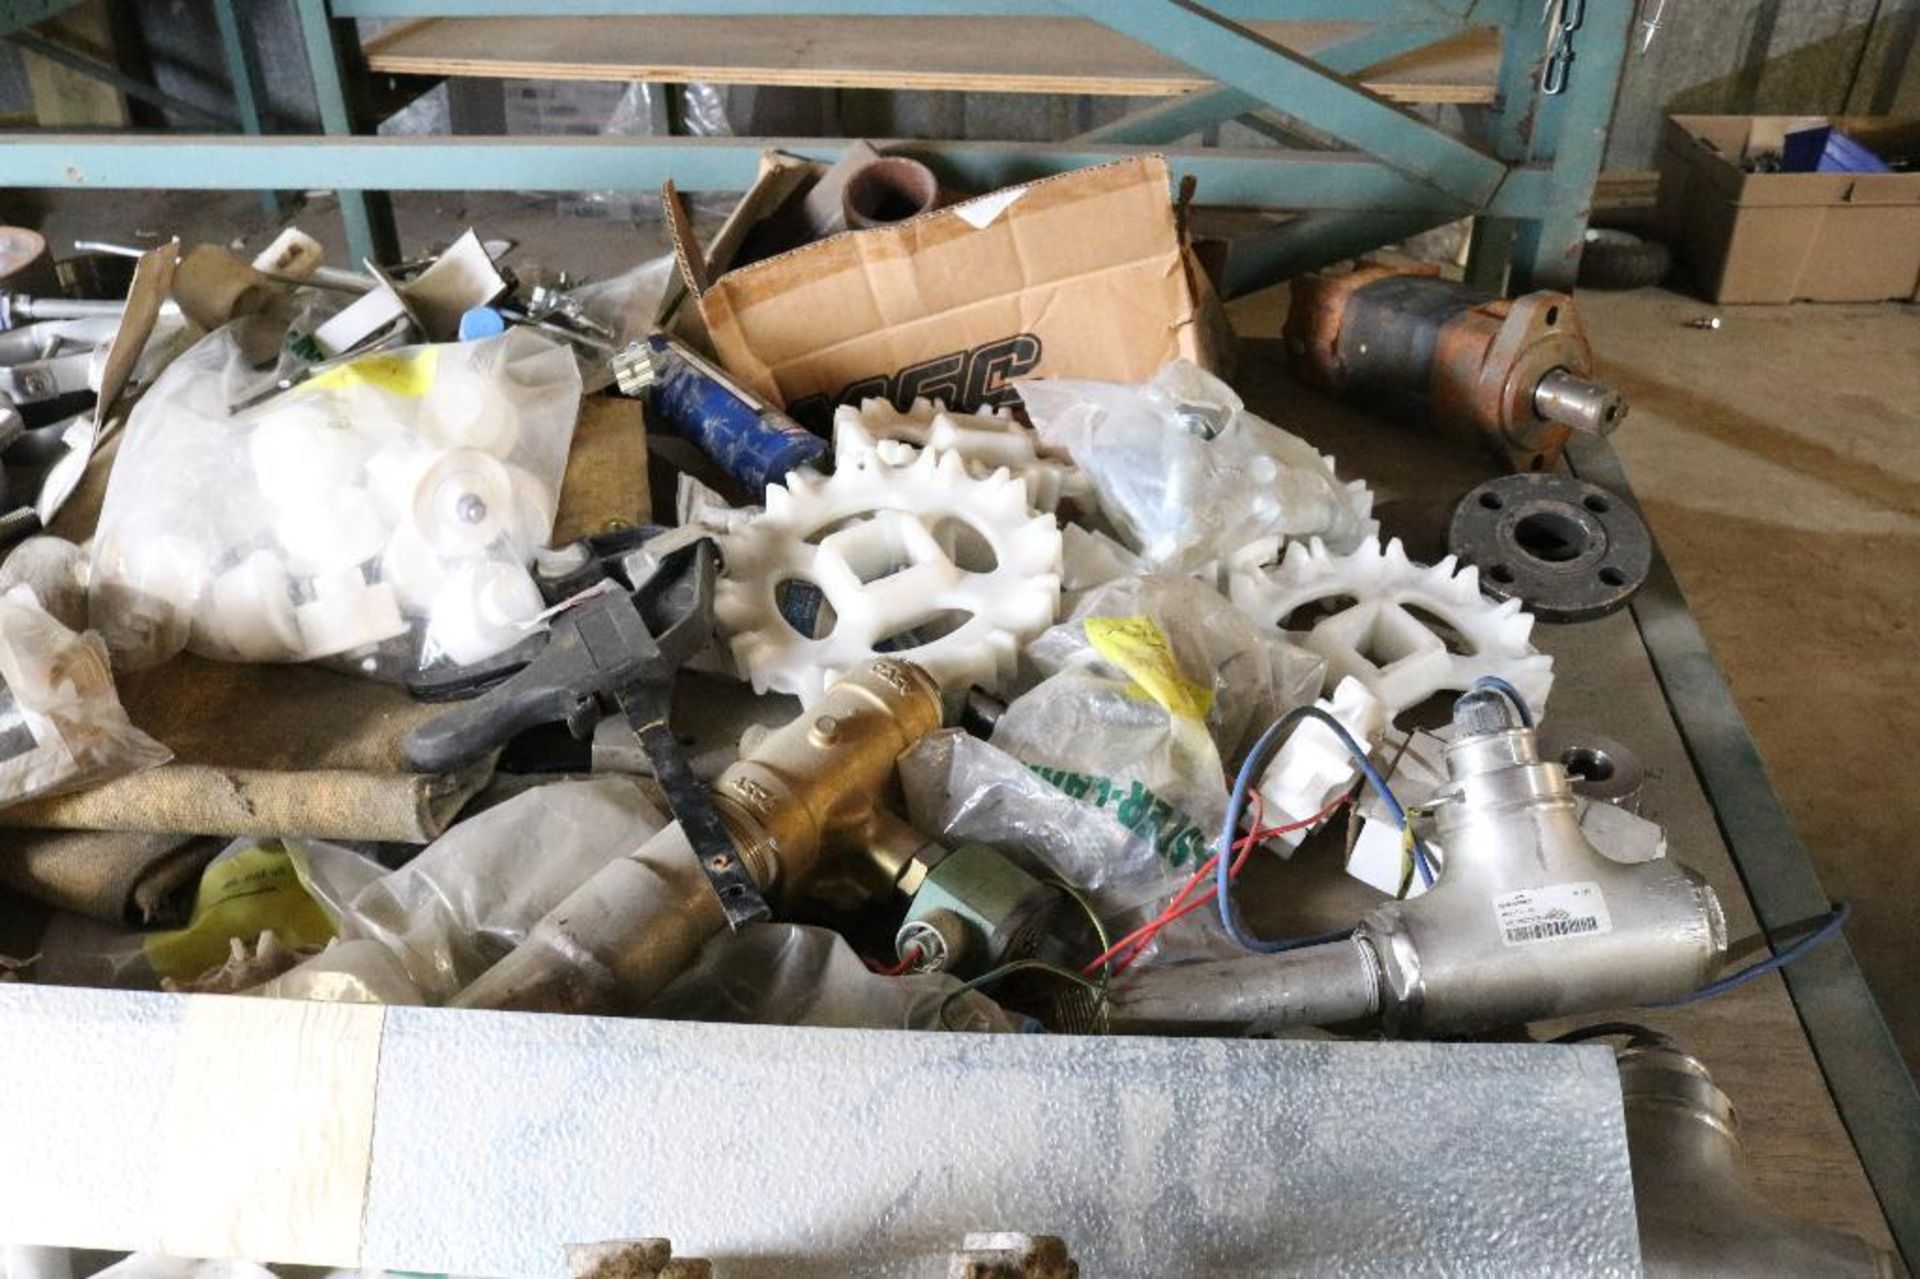 Contents of Shelves - Includes Pipe Fittings, Flanges, and Other Misc. Pipe Components - Image 9 of 9